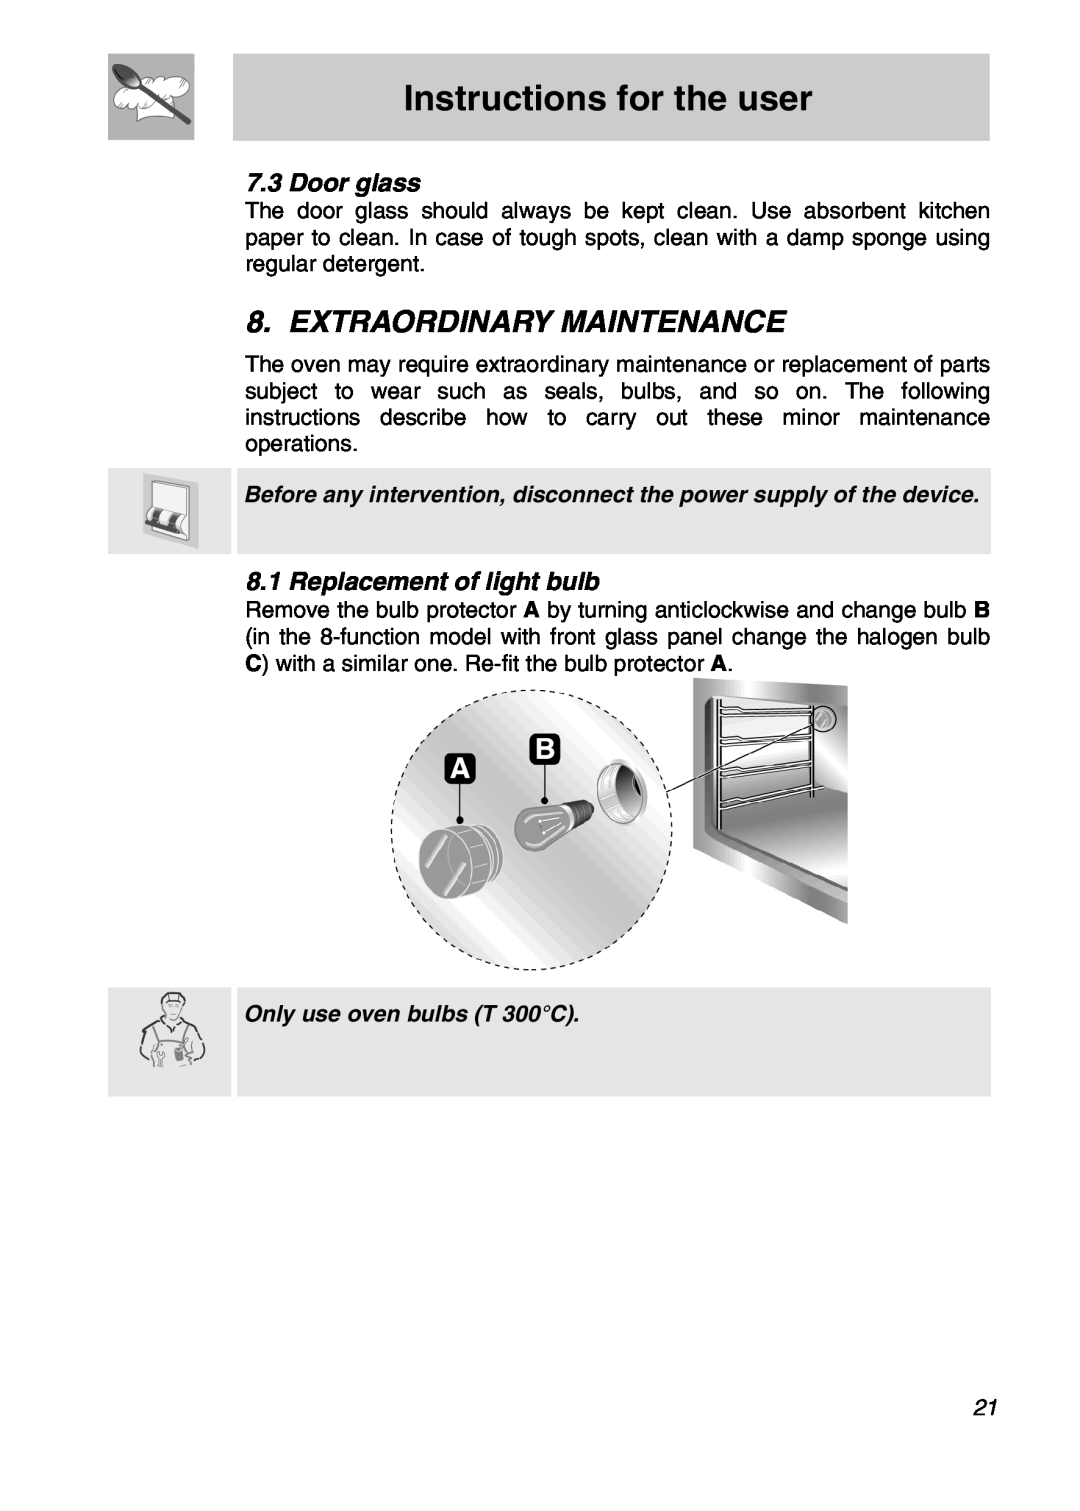 Smeg SA301X manual Extraordinary Maintenance, Door glass, Replacement of light bulb, Instructions for the user 